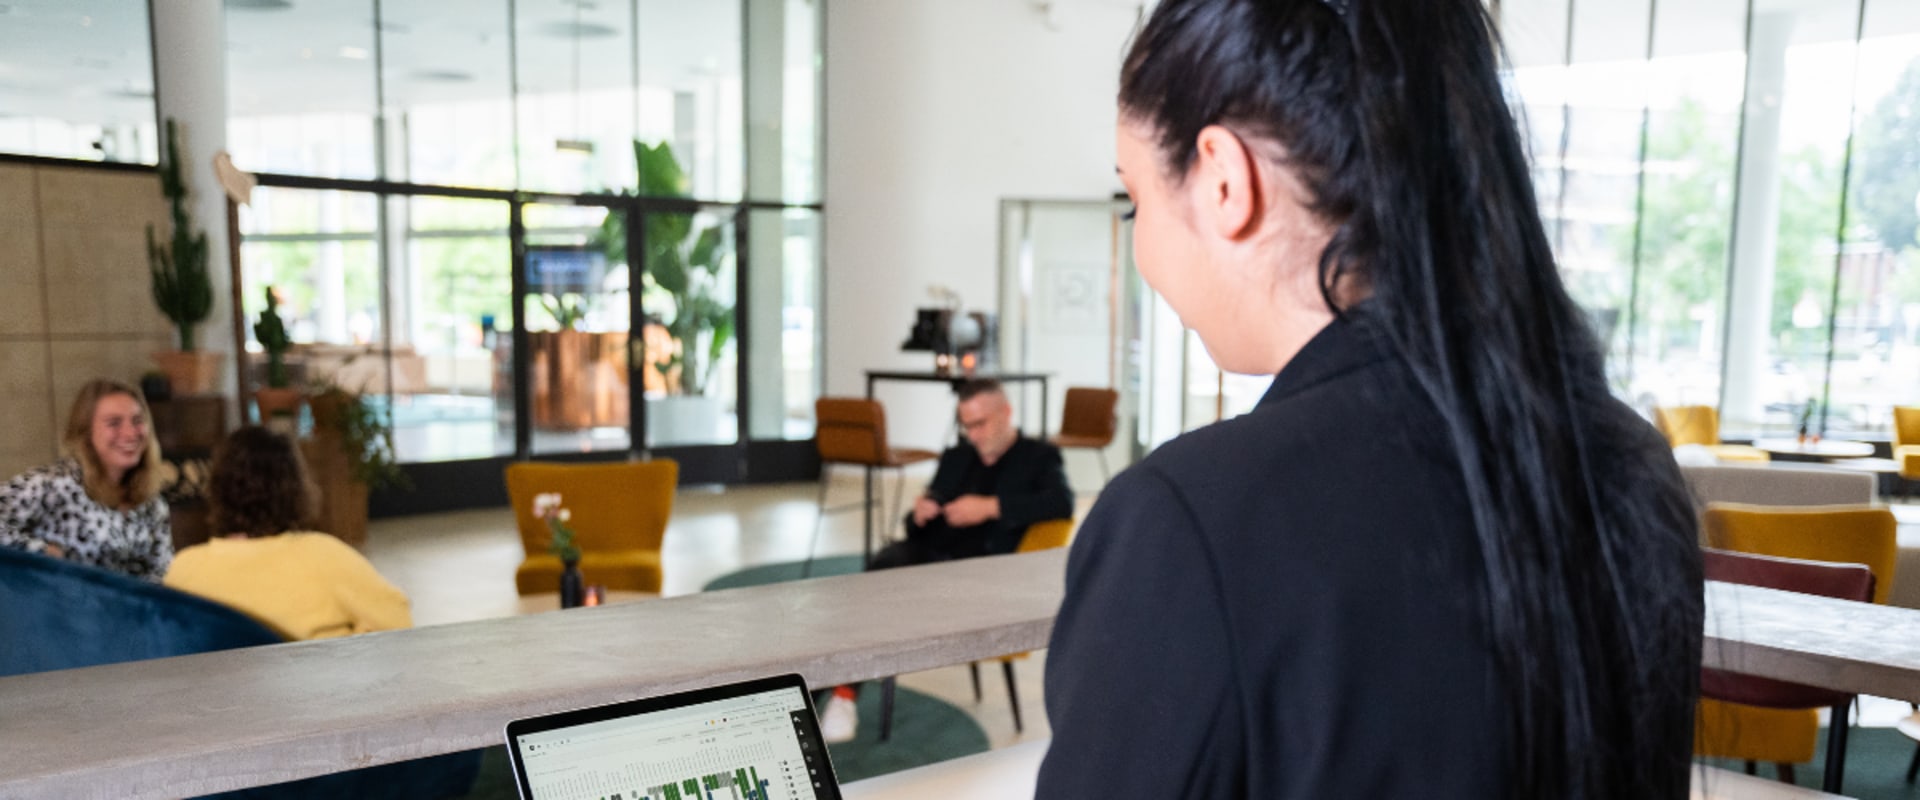 How Hotel Software Can Help Improve Customer Service